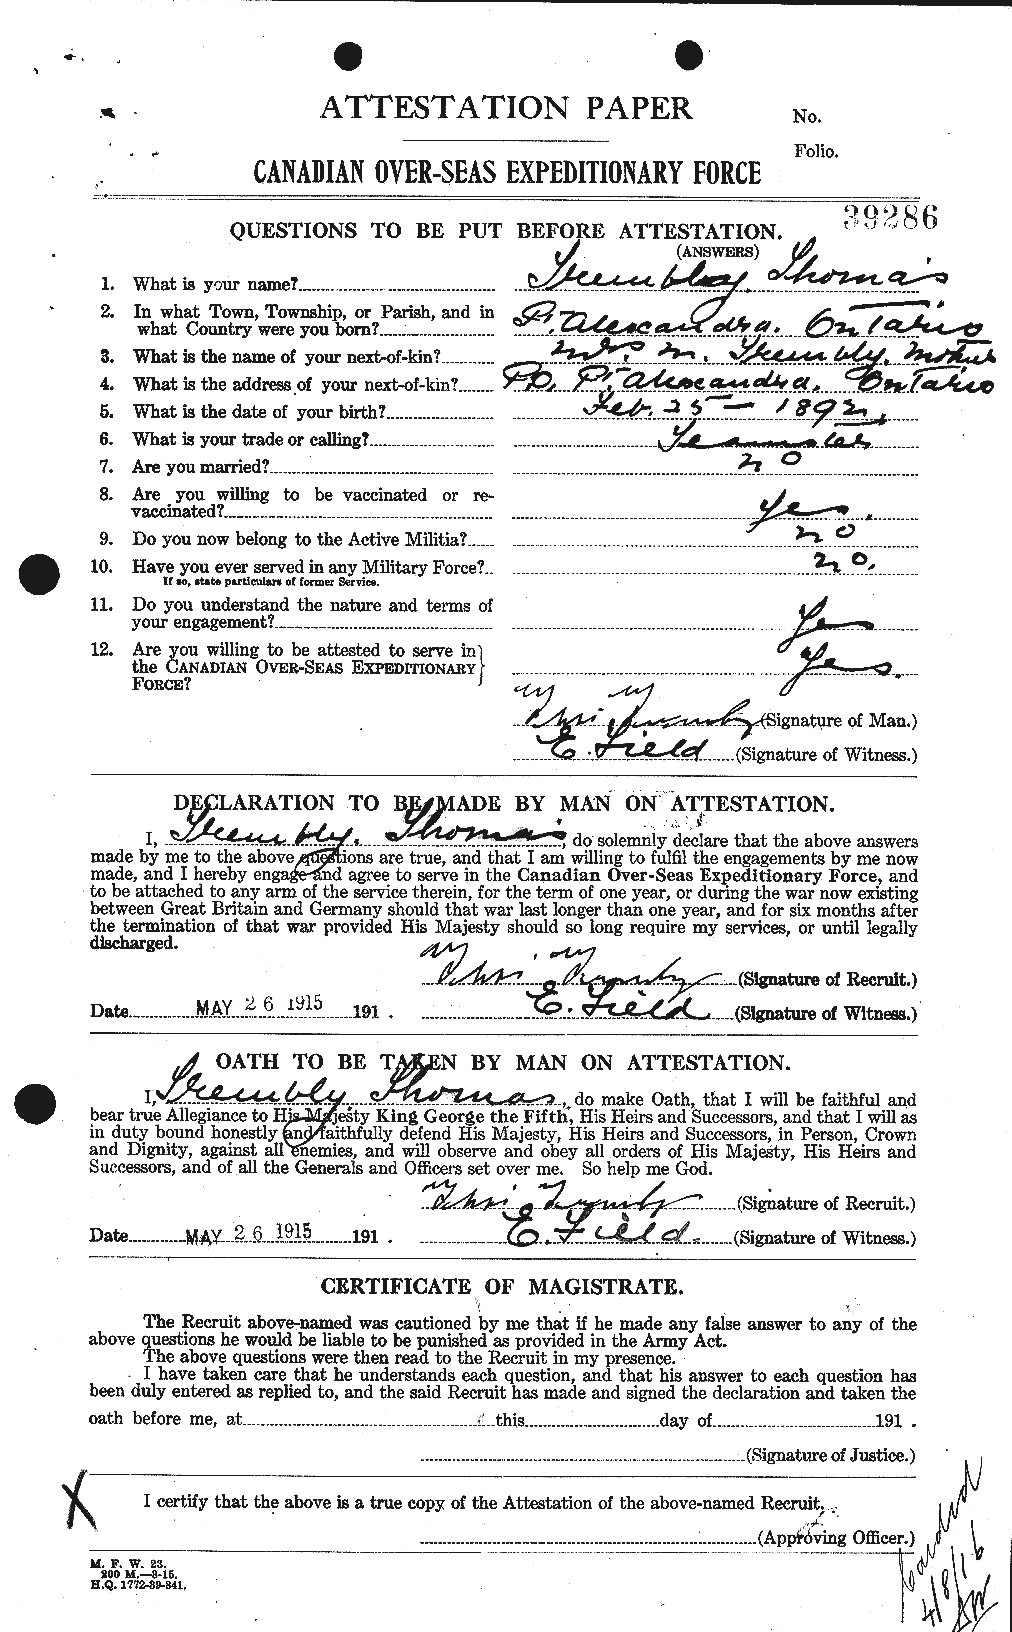 Personnel Records of the First World War - CEF 638317a